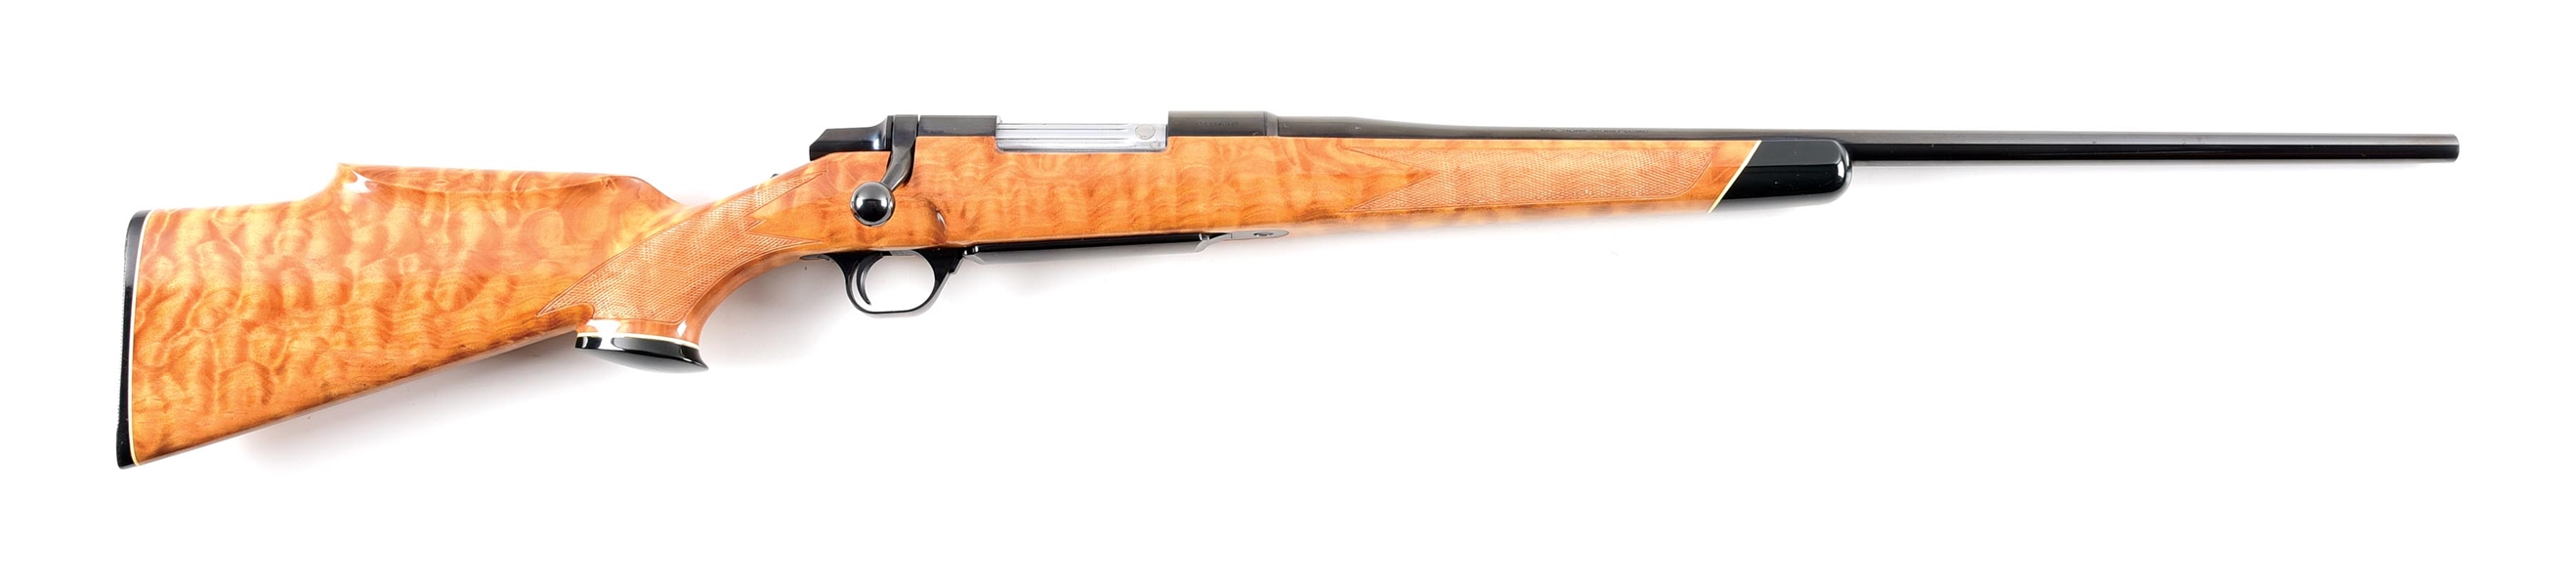 (M) BROWNING BBR BOLT ACTION RIFLE WITH MAPLE (SHELL FLAME) / ACER MACROPHYLUM STOCK.